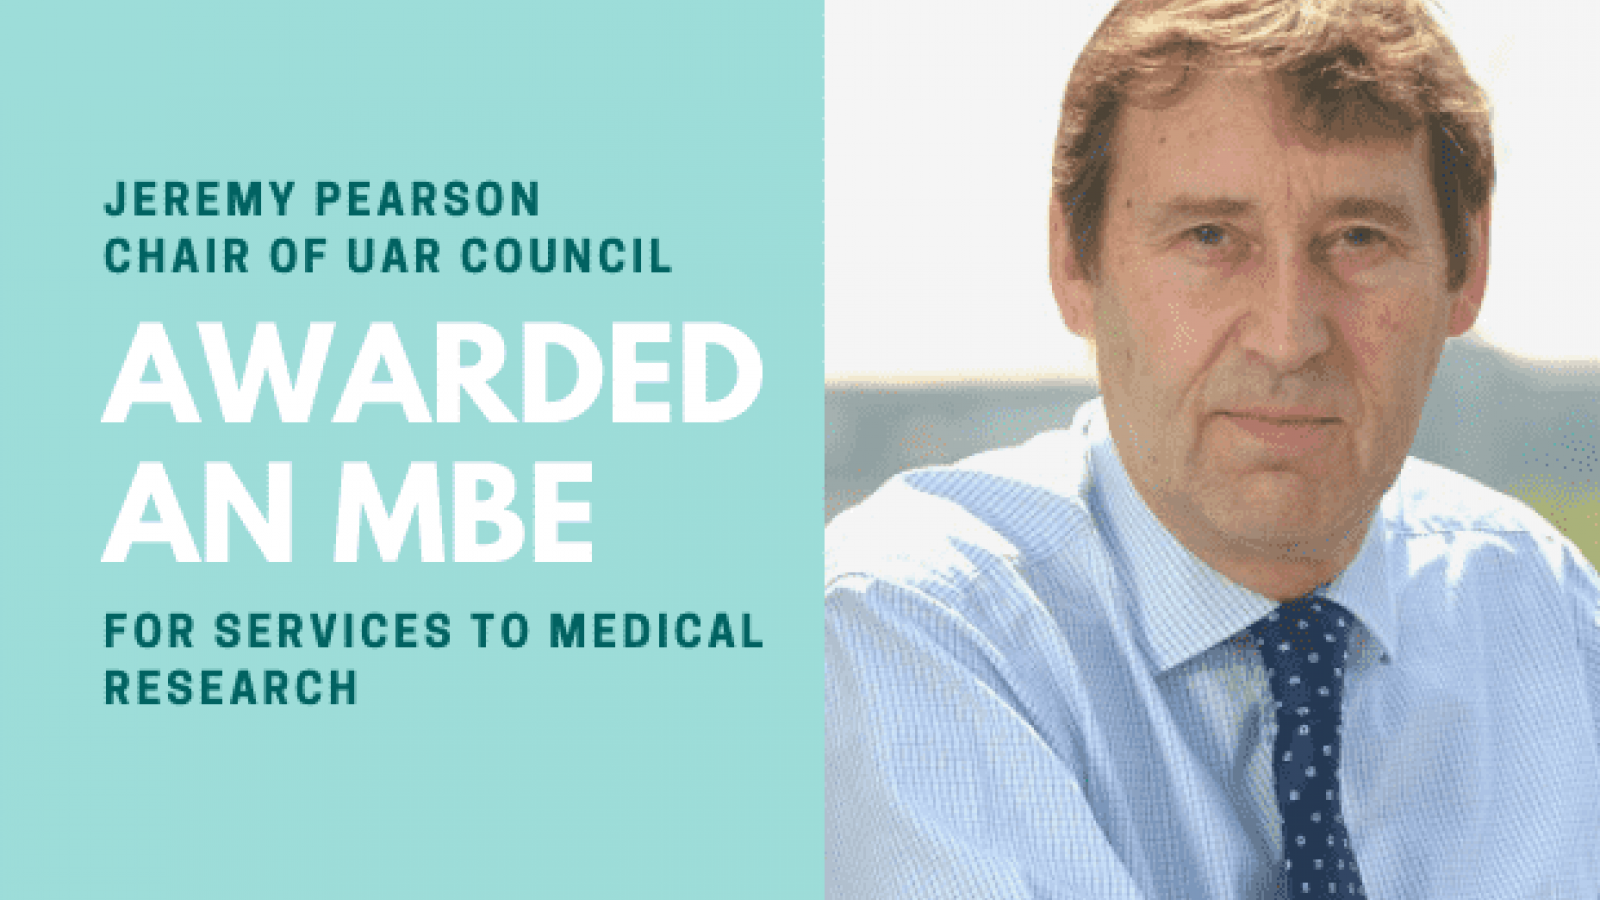 Chair of UAR Council, Jeremy Pearson, awarded MBE